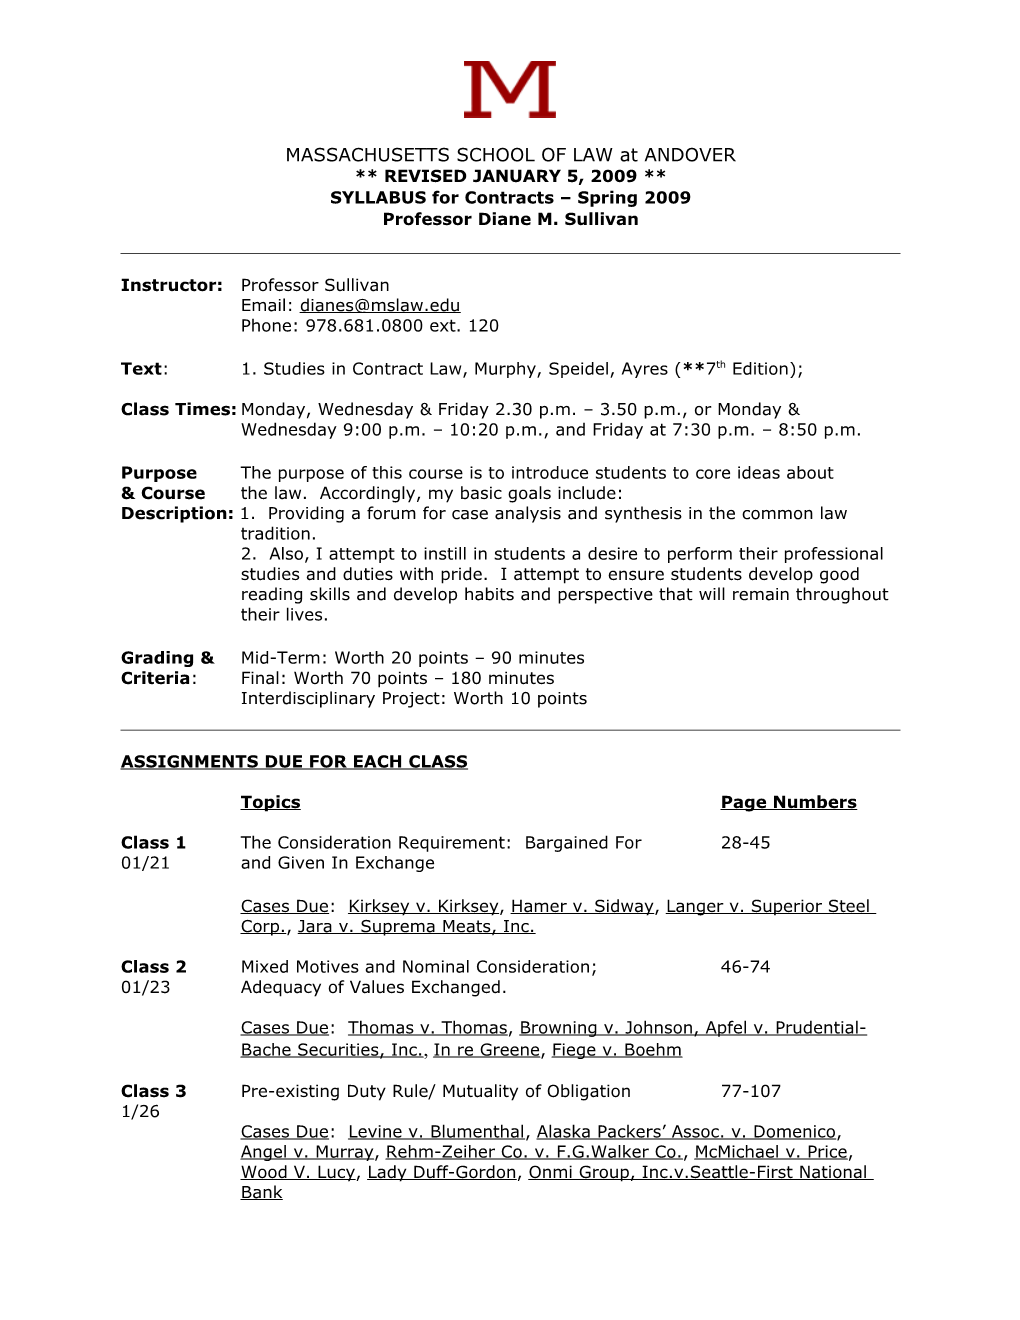 SYLLABUS for Contracts Spring 2009